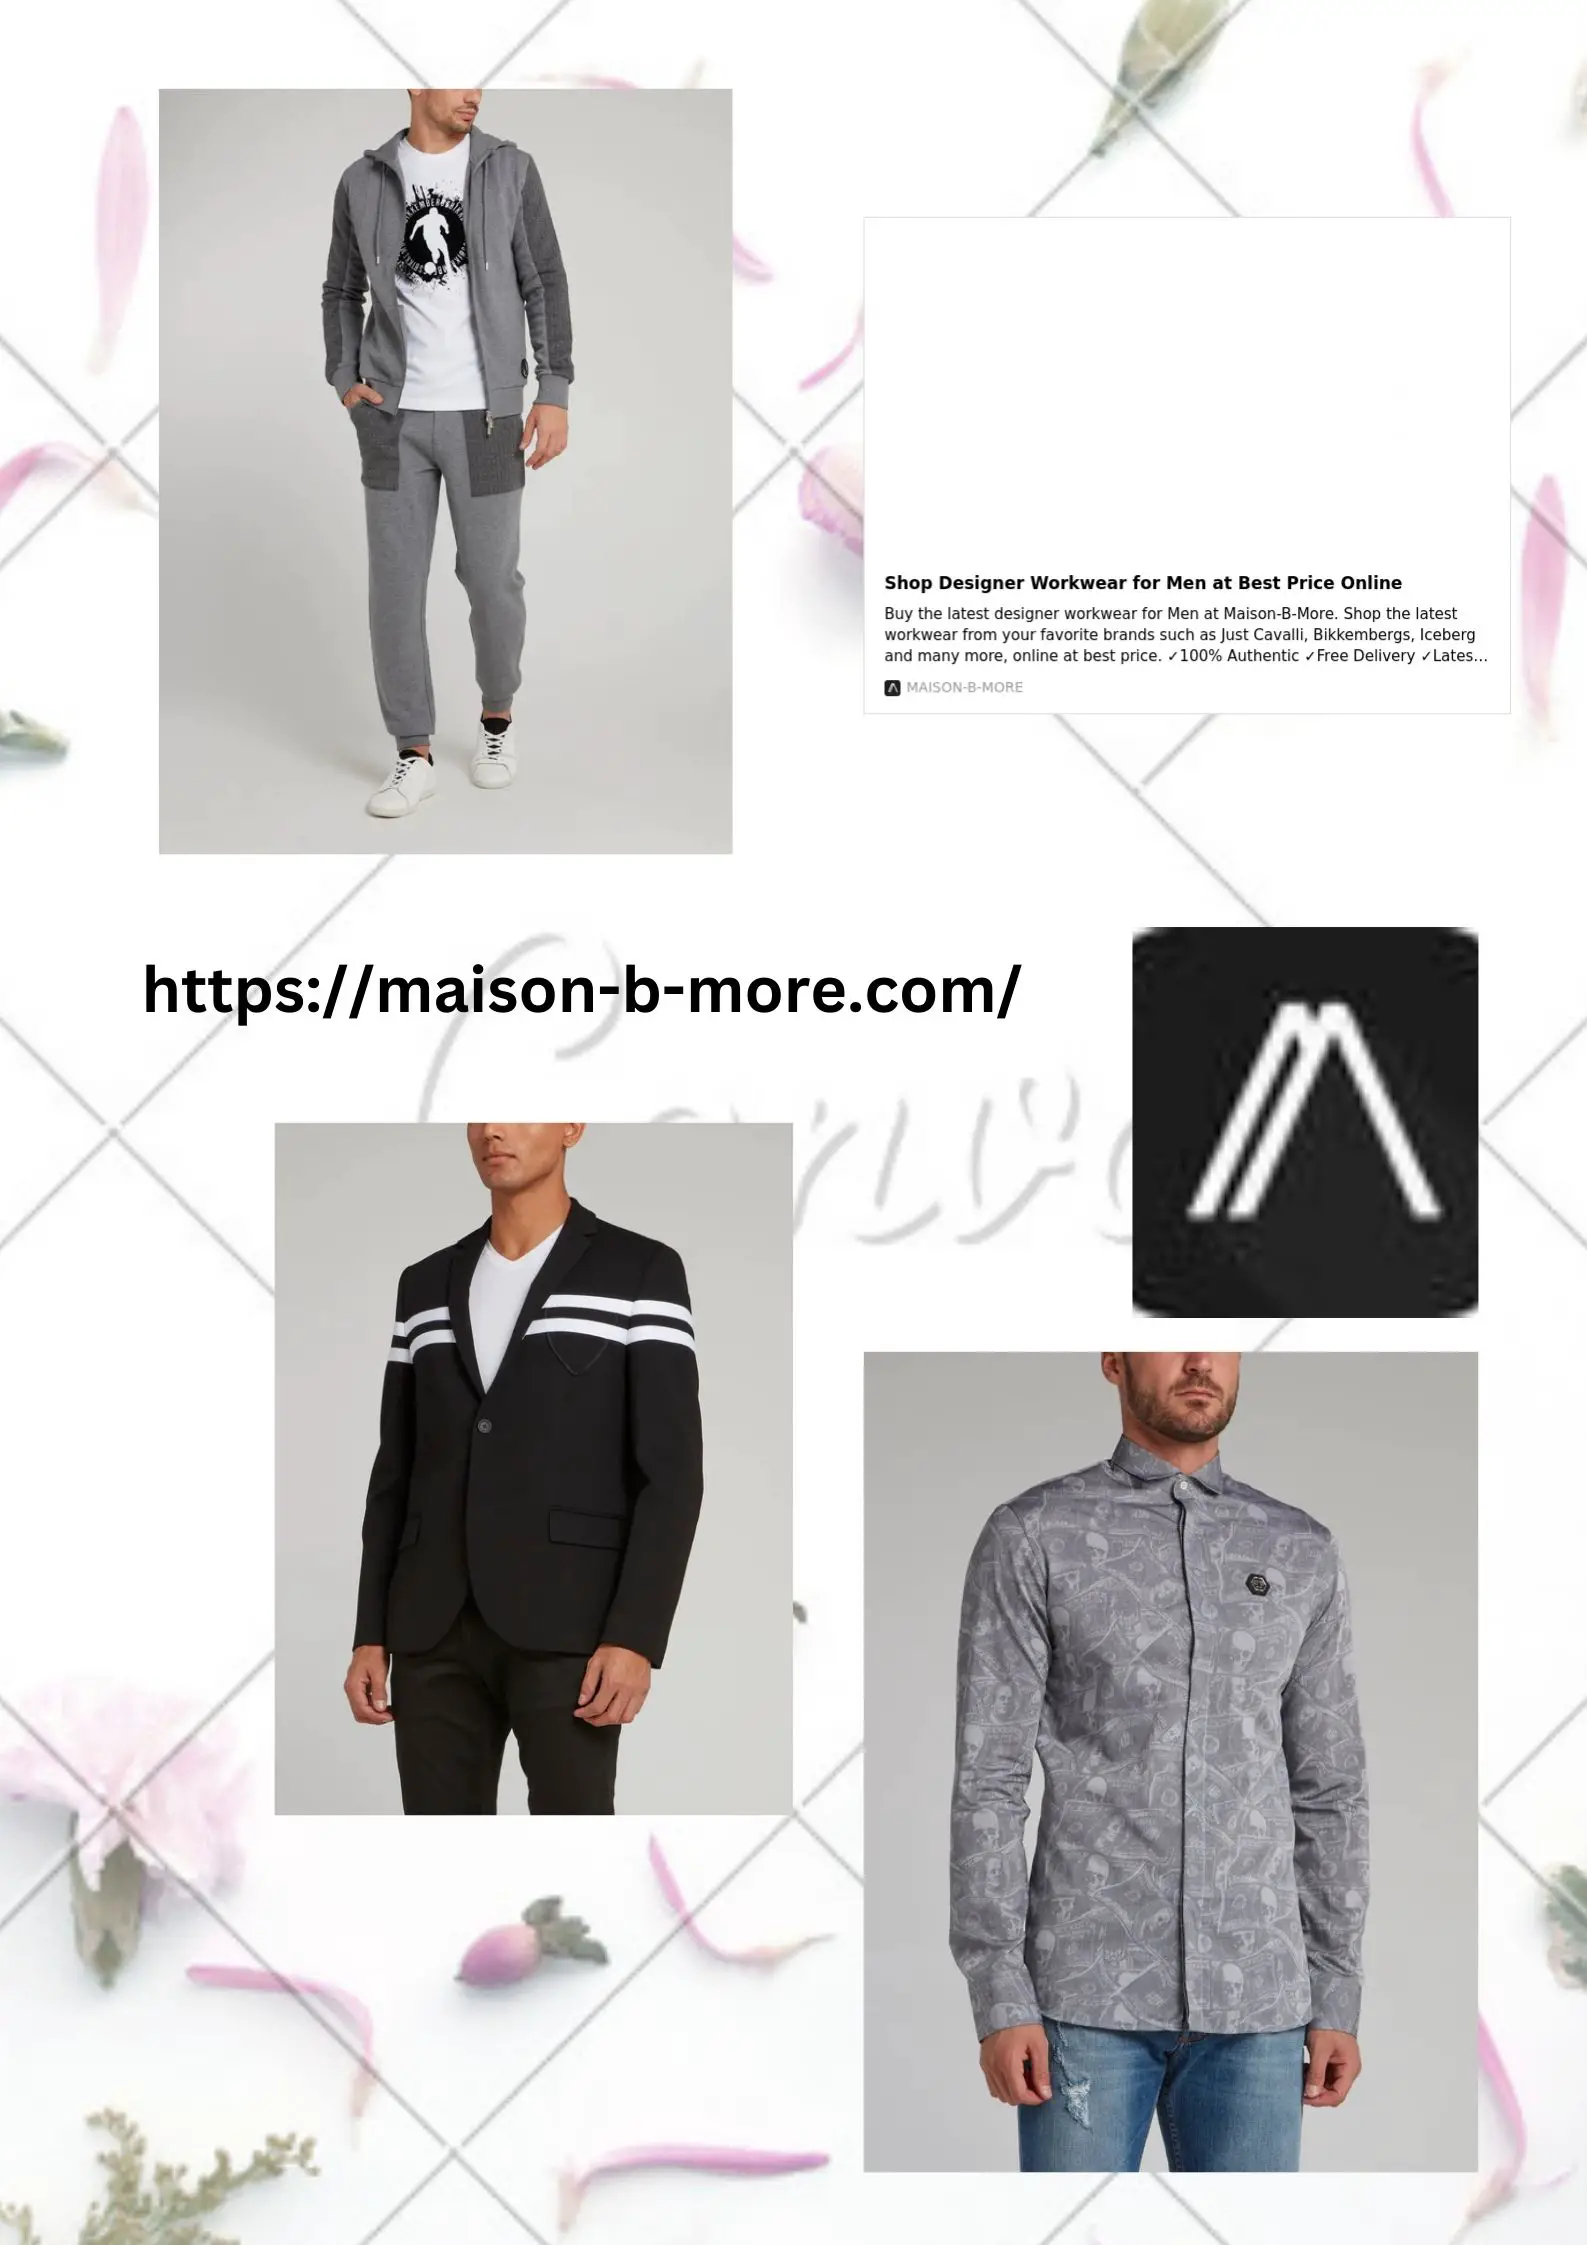 httpsmaison-b-more.comcollectionsmen-workwear